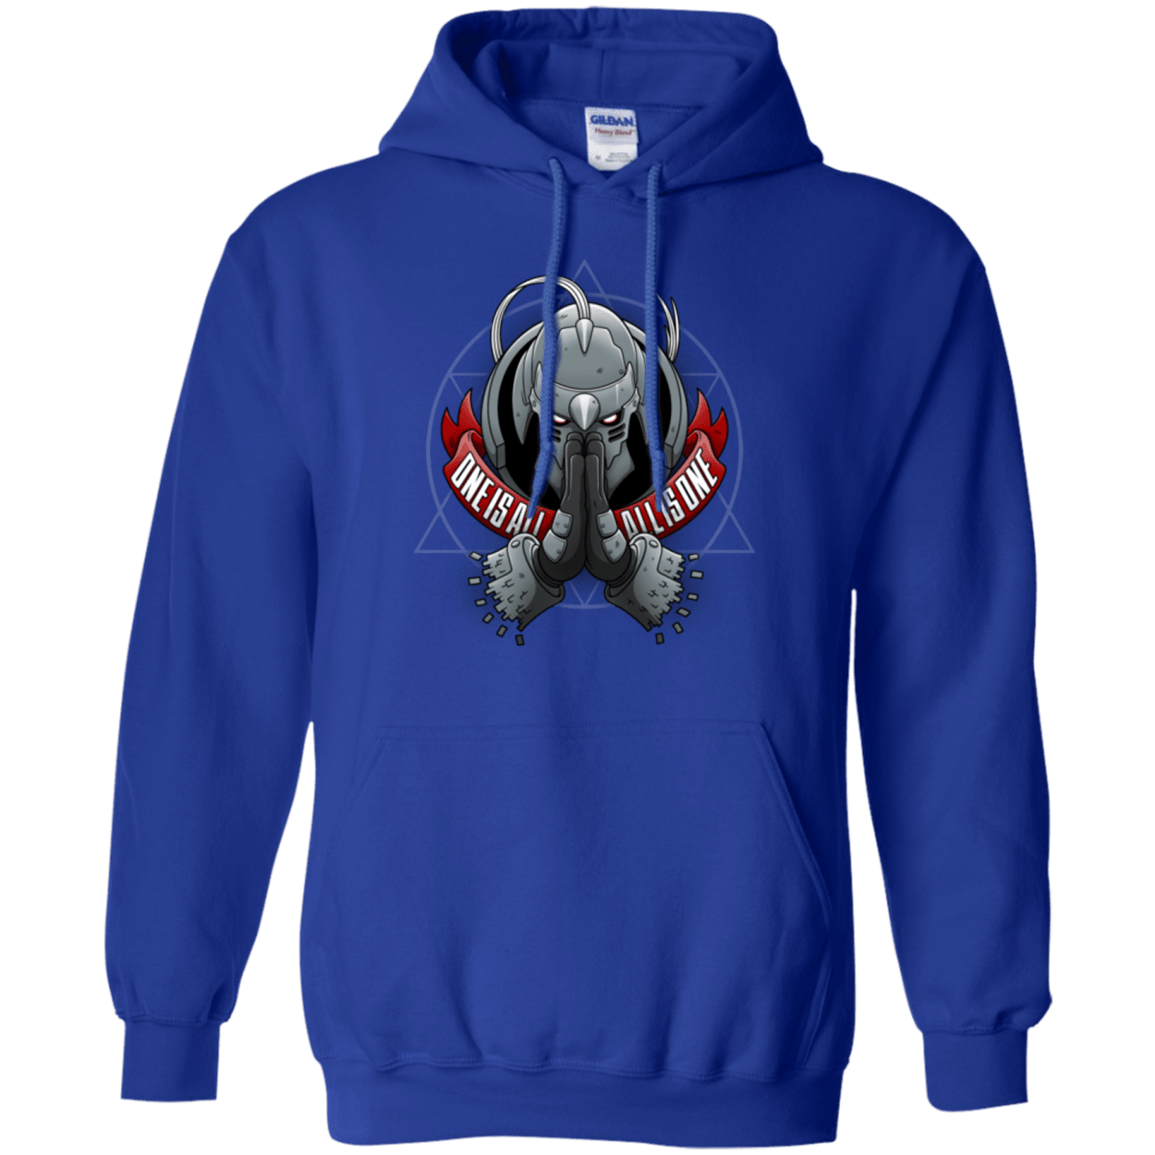 Sweatshirts Royal / Small ONE IS ALL ALL IS ONE Pullover Hoodie